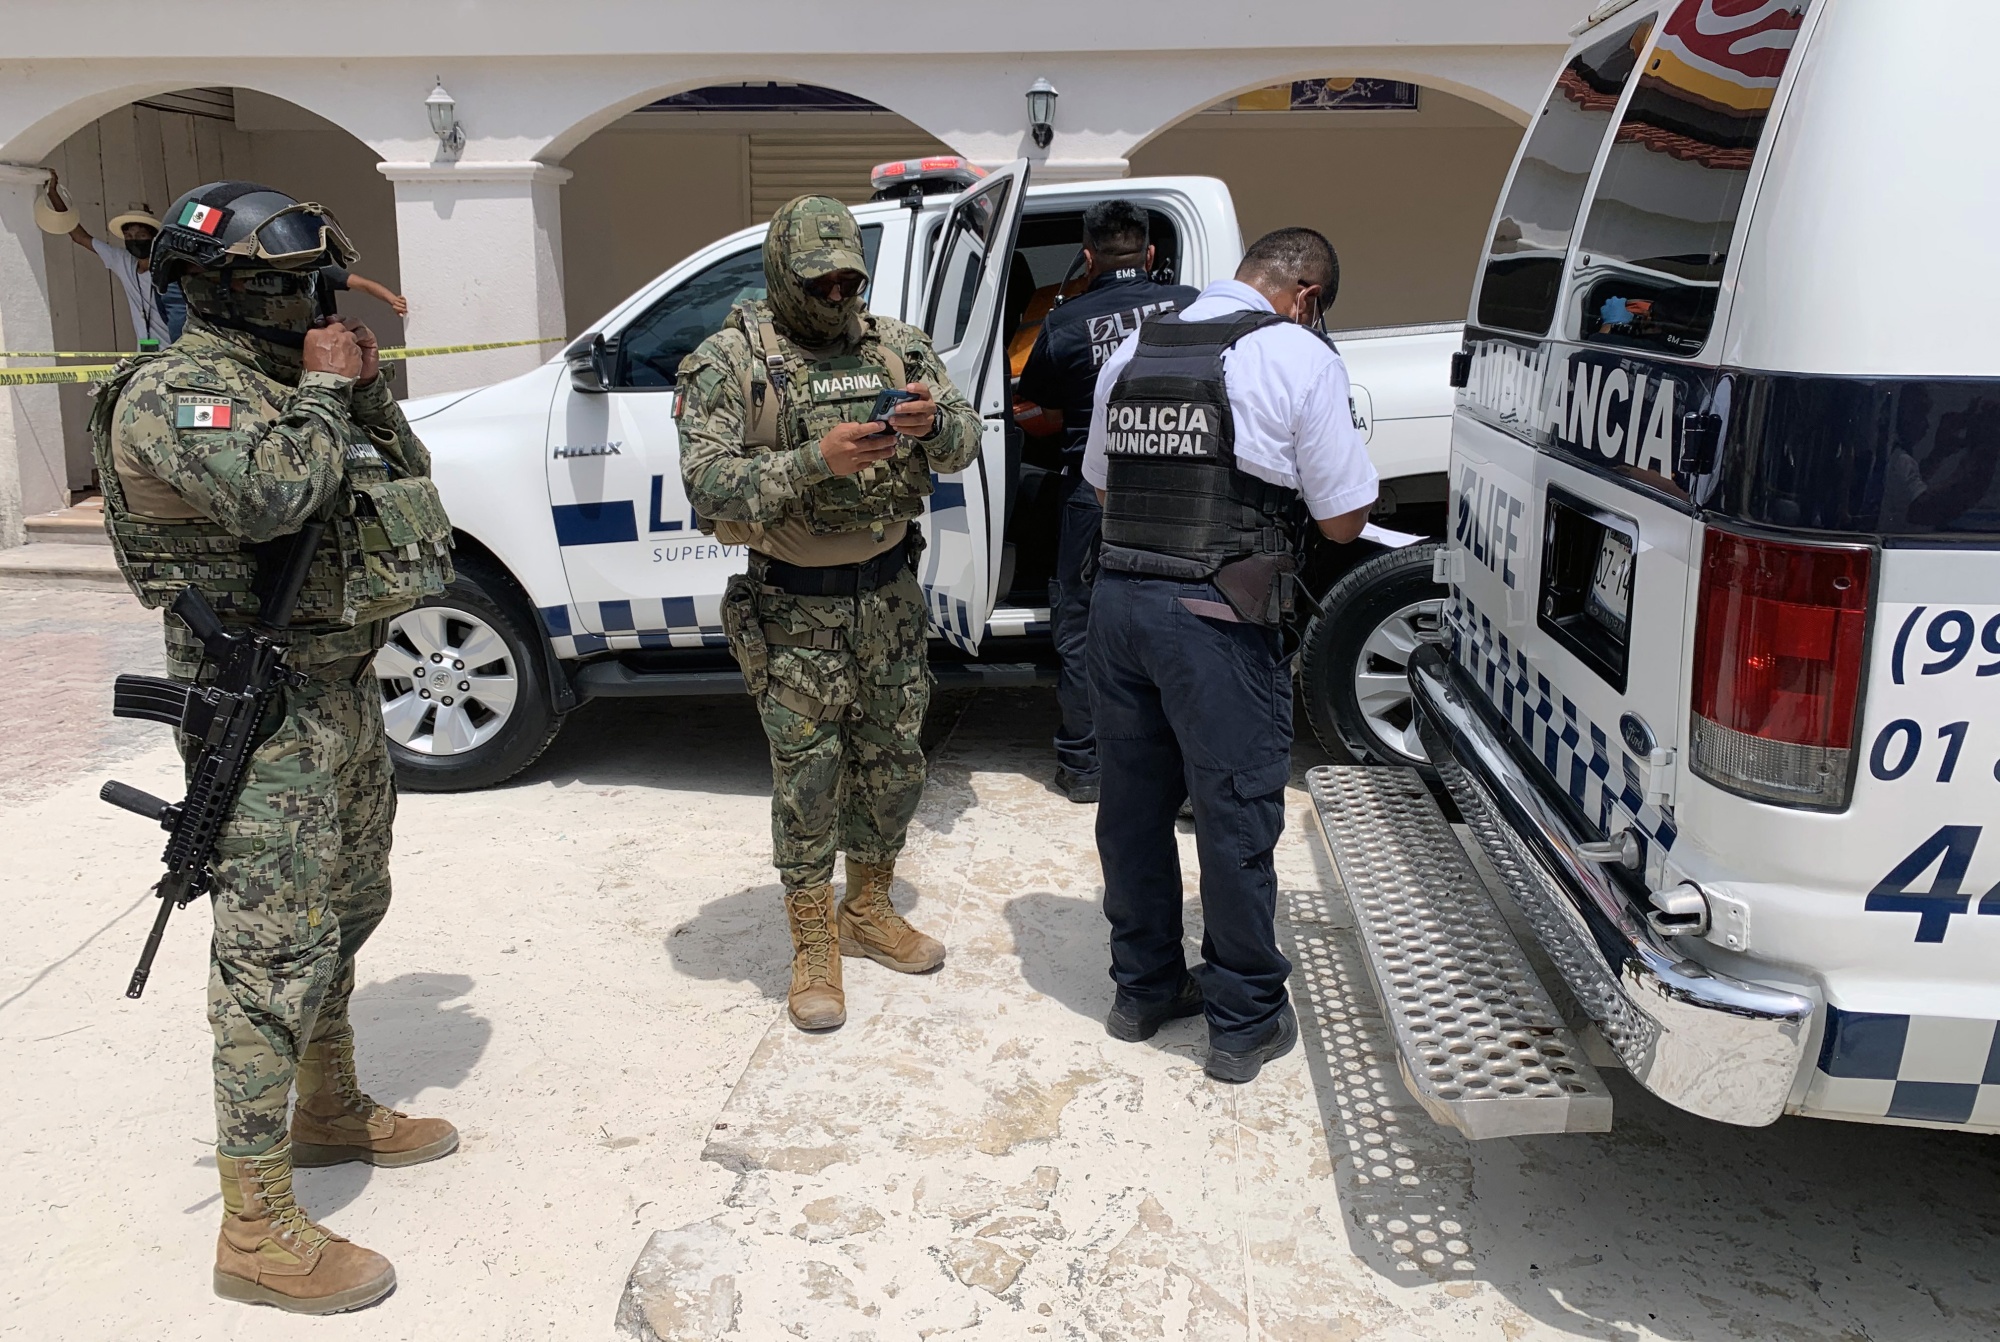 US Tourist Wounded in Beach Killings in Cancún, Mexico Bloomberg